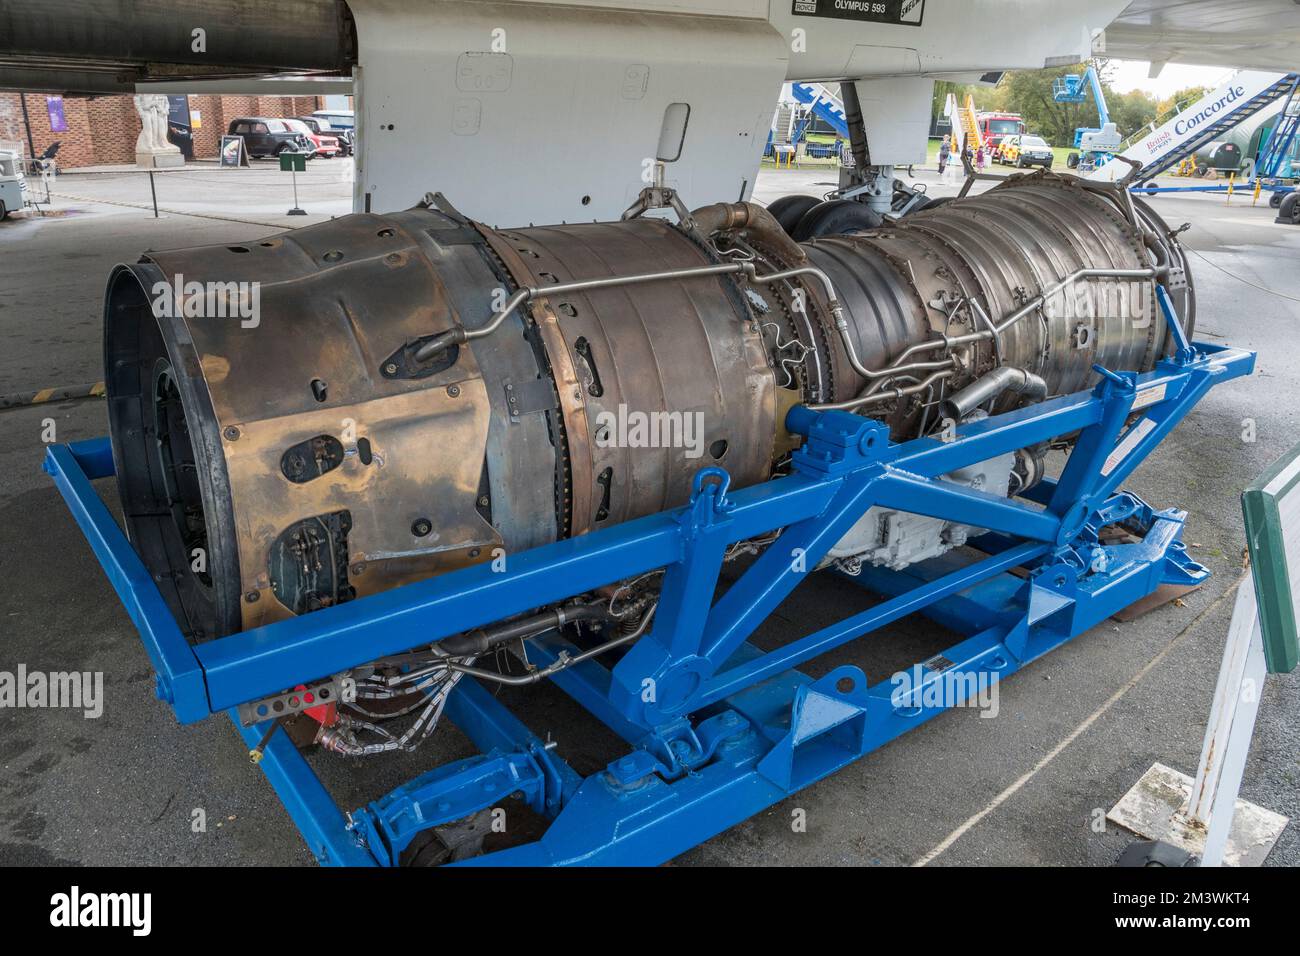 A Rolls Royce/Snecma Olympus 593 jet engine, used on the BAC Concorde (G-BBDG) on display at the Brooklands Museum, Weybridge, Surrey, UK Stock Photo